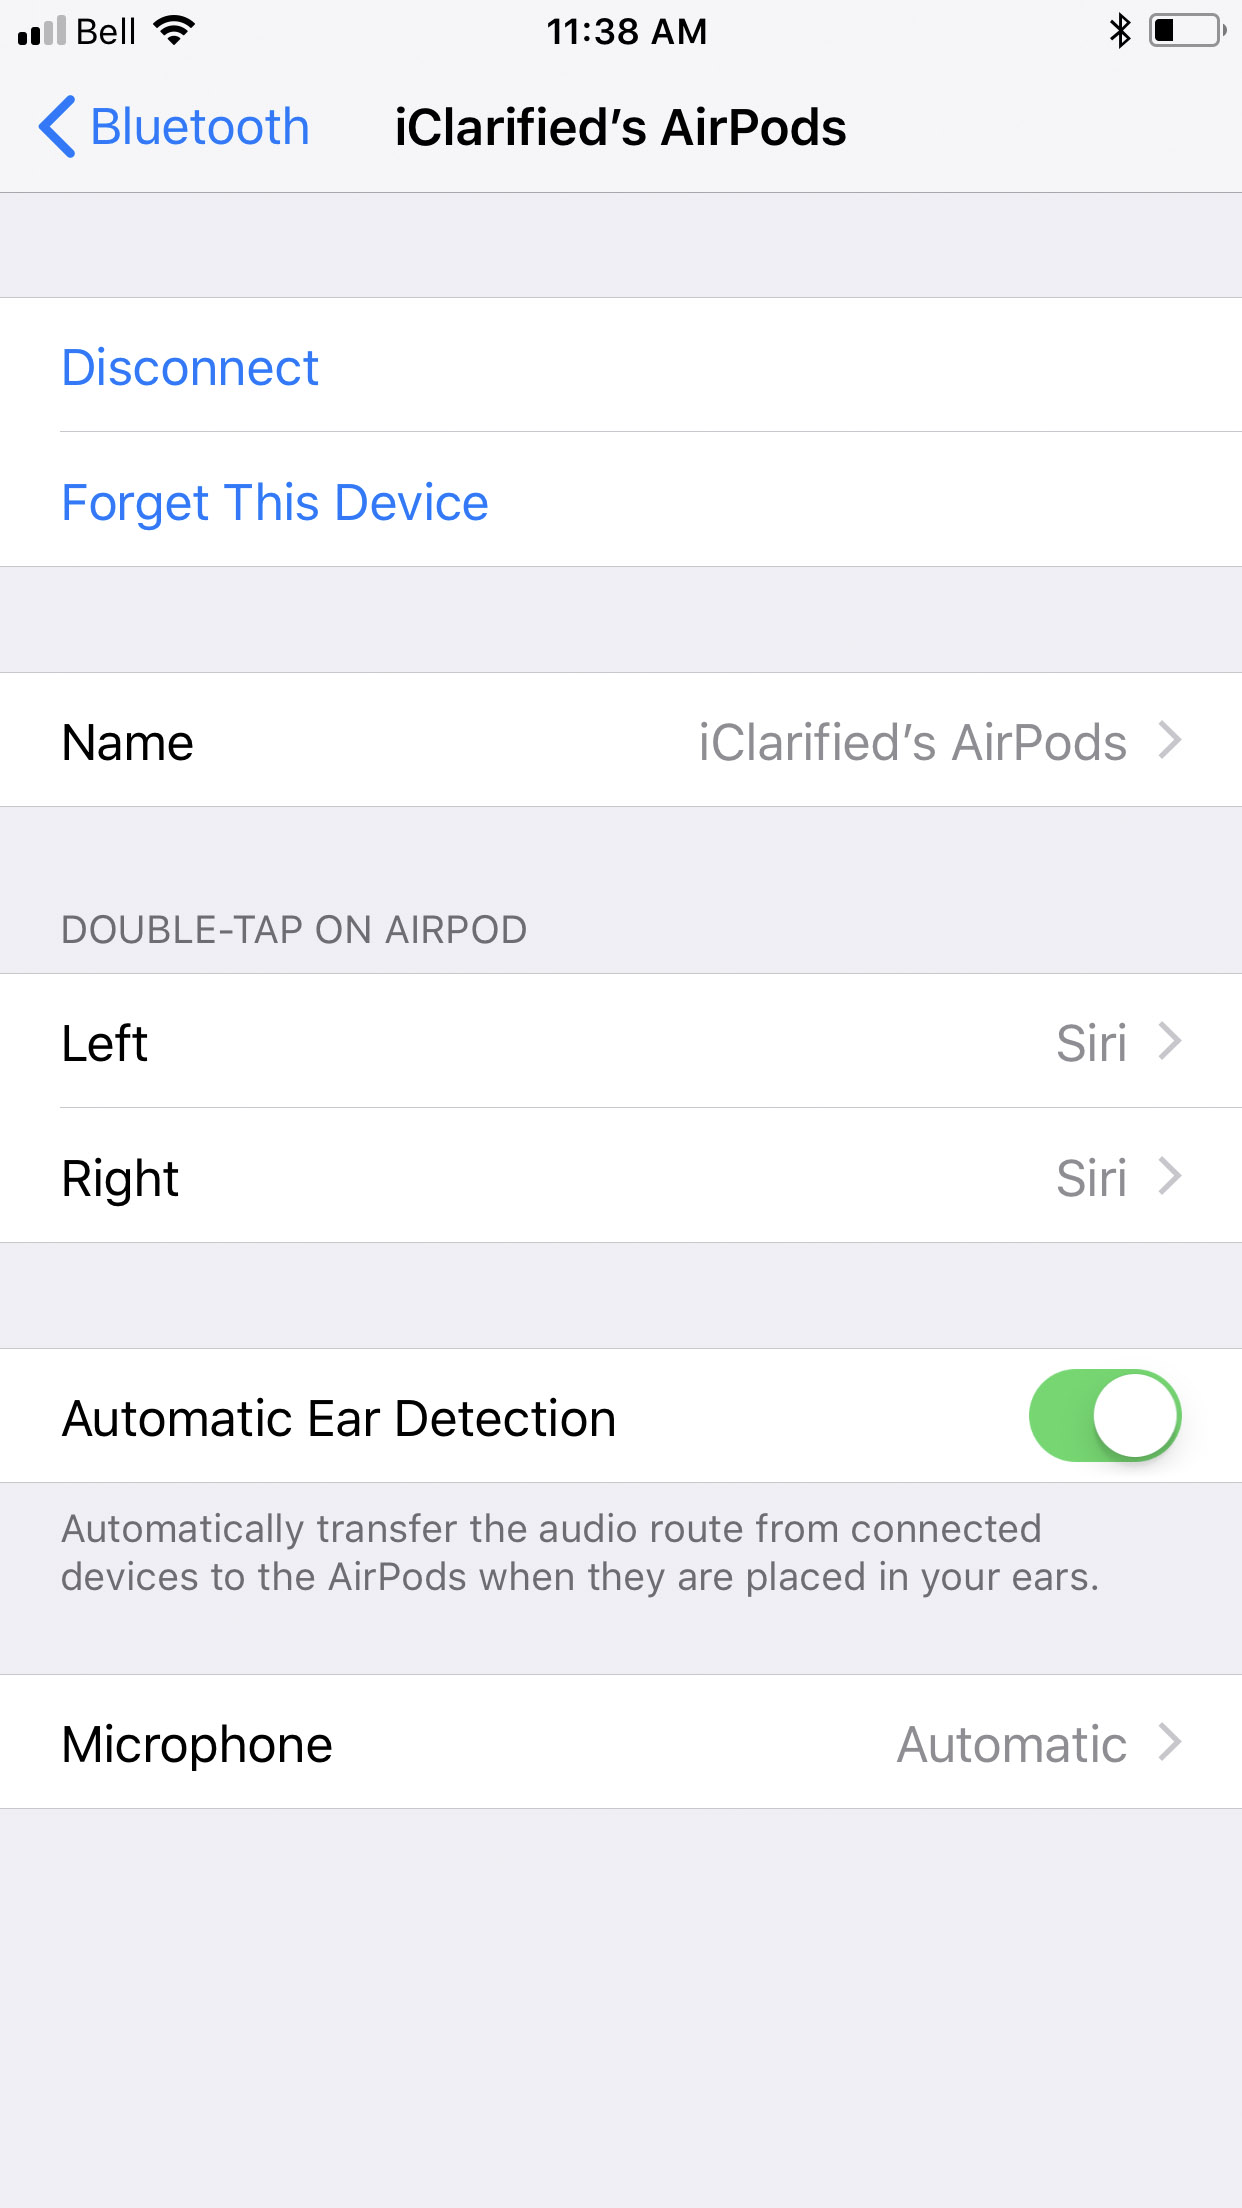 How to Skip to the Next/Previous Track and Play/Pause Using Your AirPods [Video]